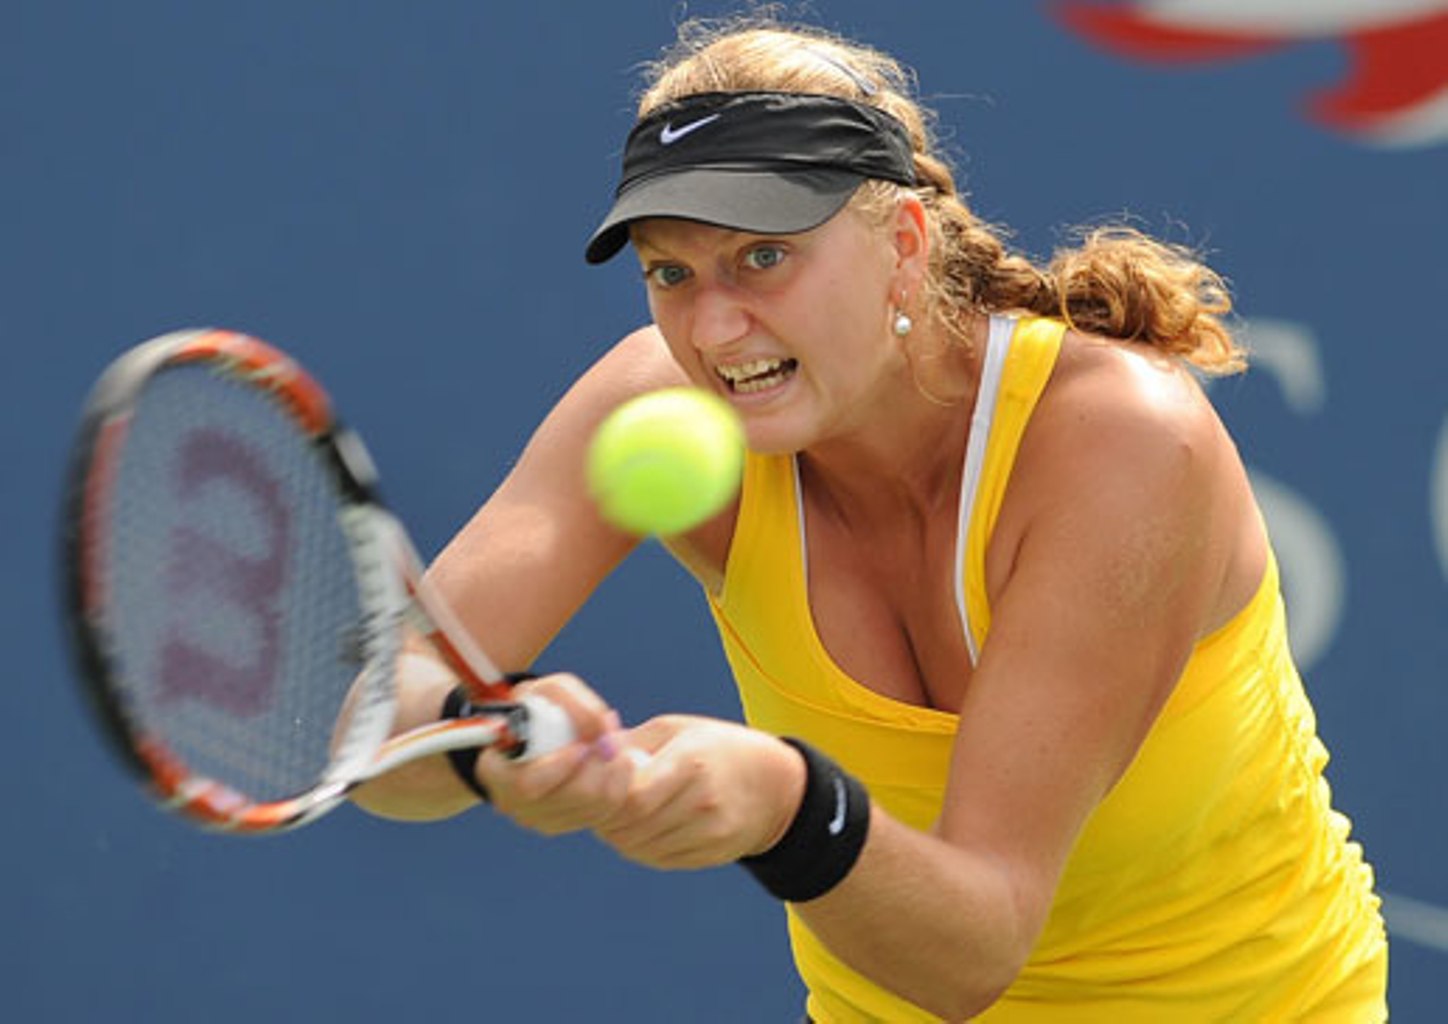 Petra Kvitova Biography And Pictures 2013 | All Stars